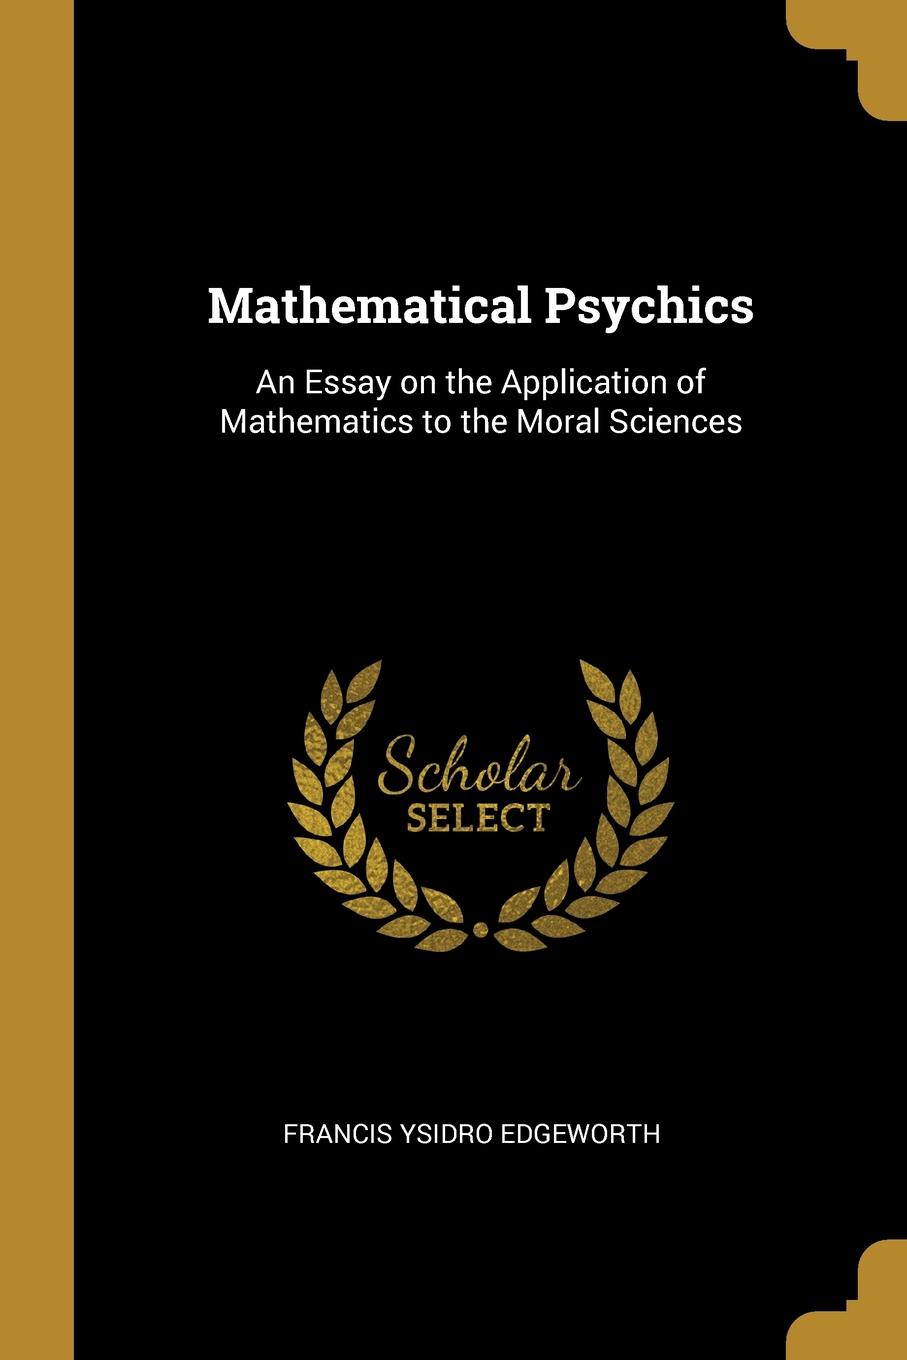 Mathematical Psychics. An Essay on the Application of Mathematics to the Moral Sciences